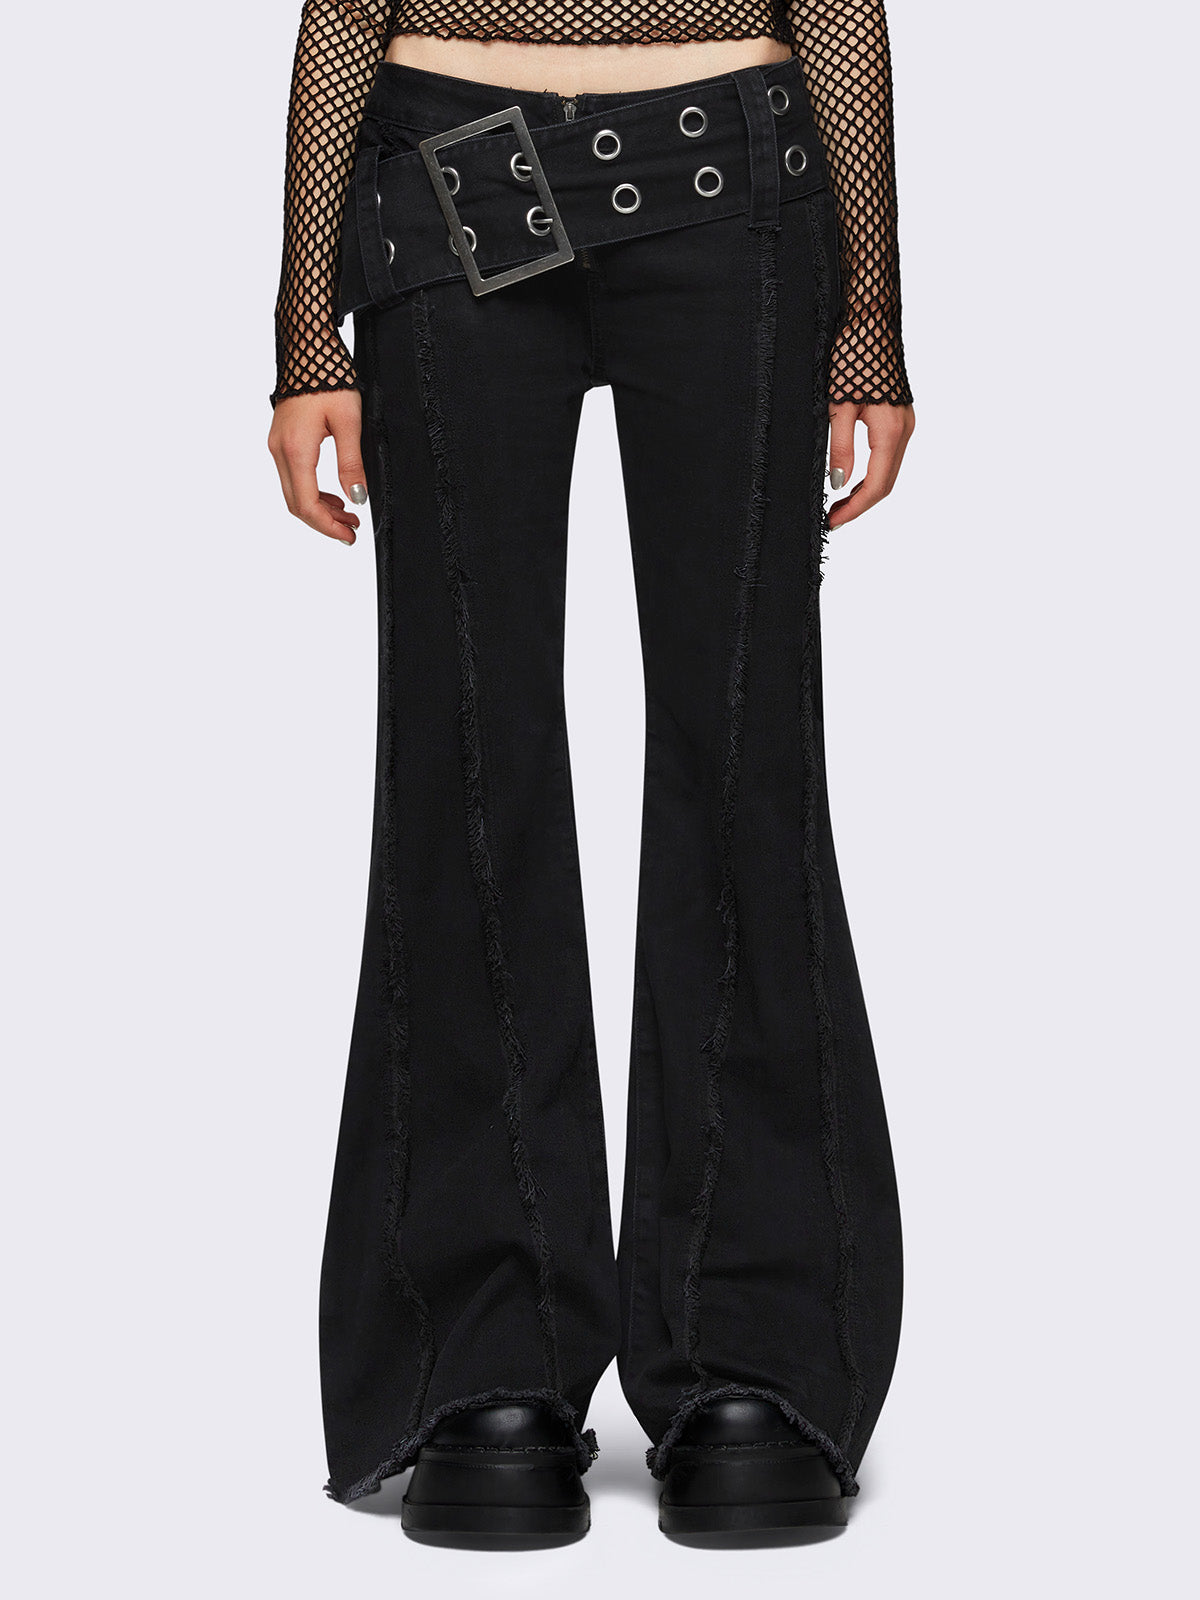 Flared jeans in black with chunky buckle belt